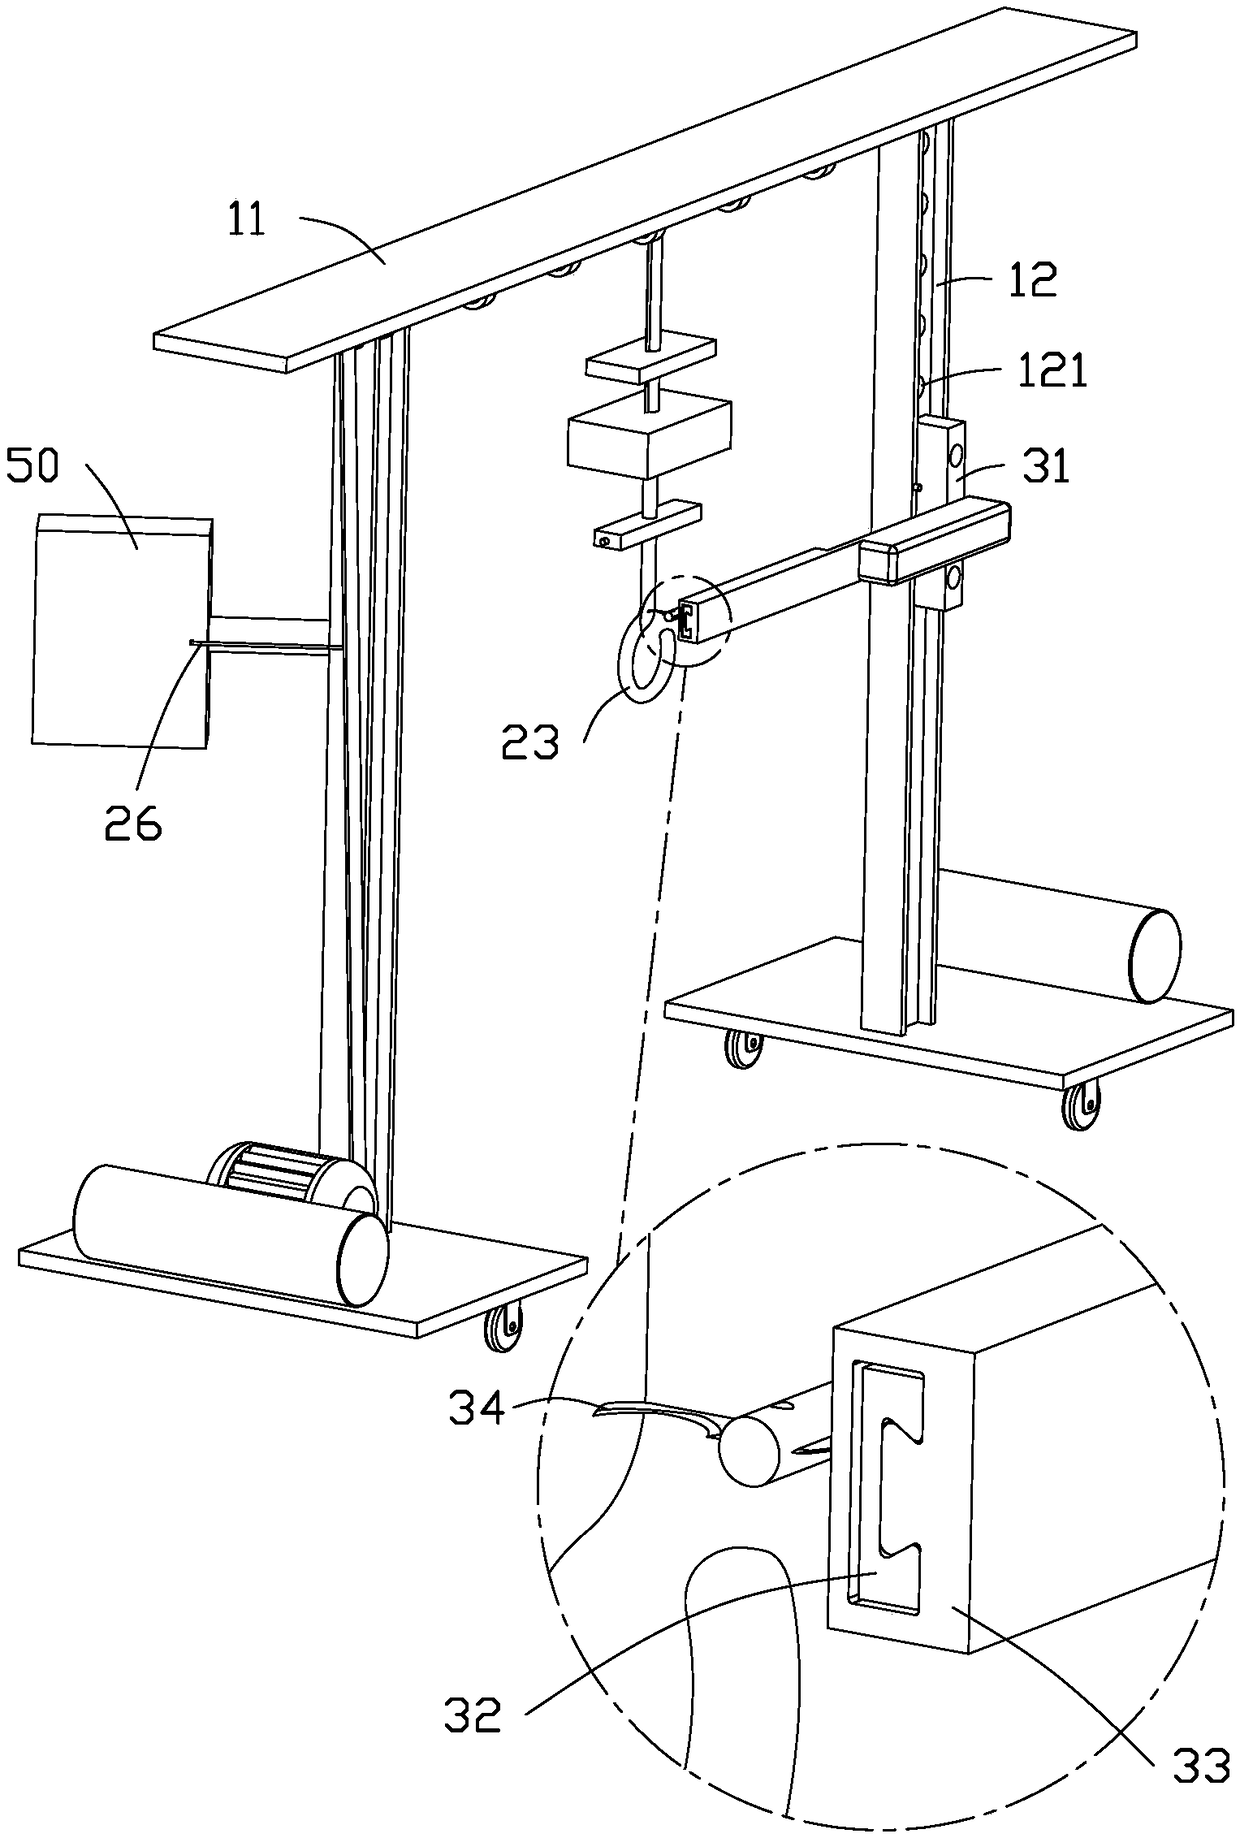 Weighing device